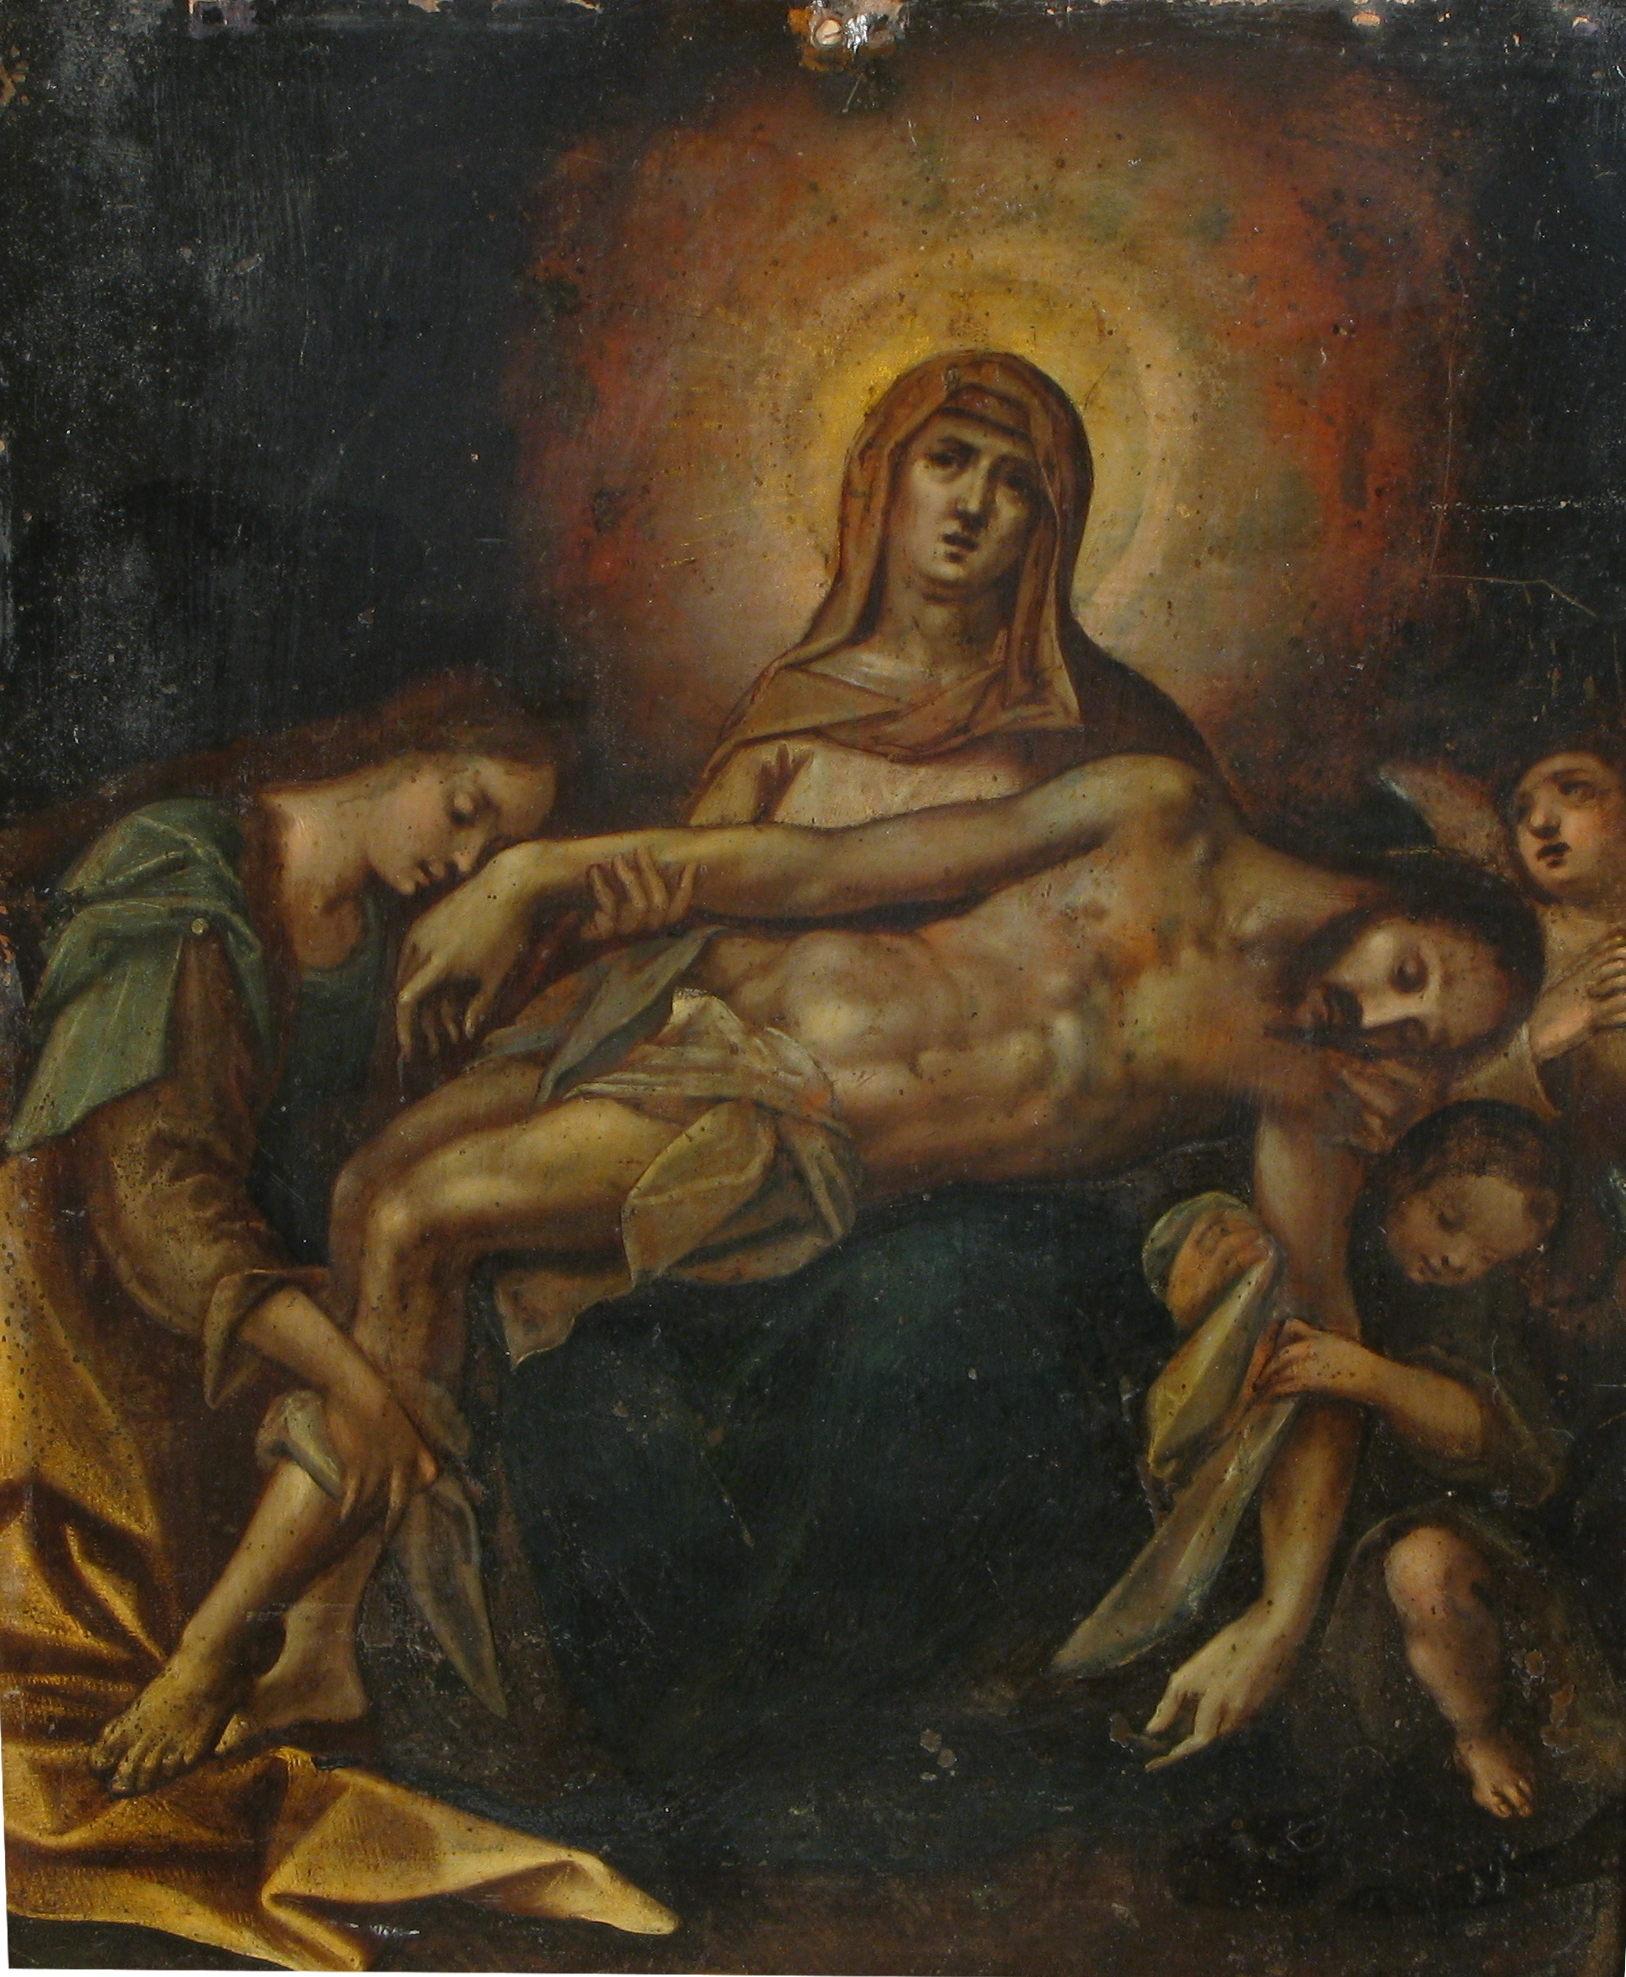 Pieta, oil painting on copper,  Northern Italy, 17th century

In the foreground is The Dead Christ, lifeless and limply reclining on Mary's knees, supported and adored by a woman who, kneeling on the left side of the composition, touches his hand